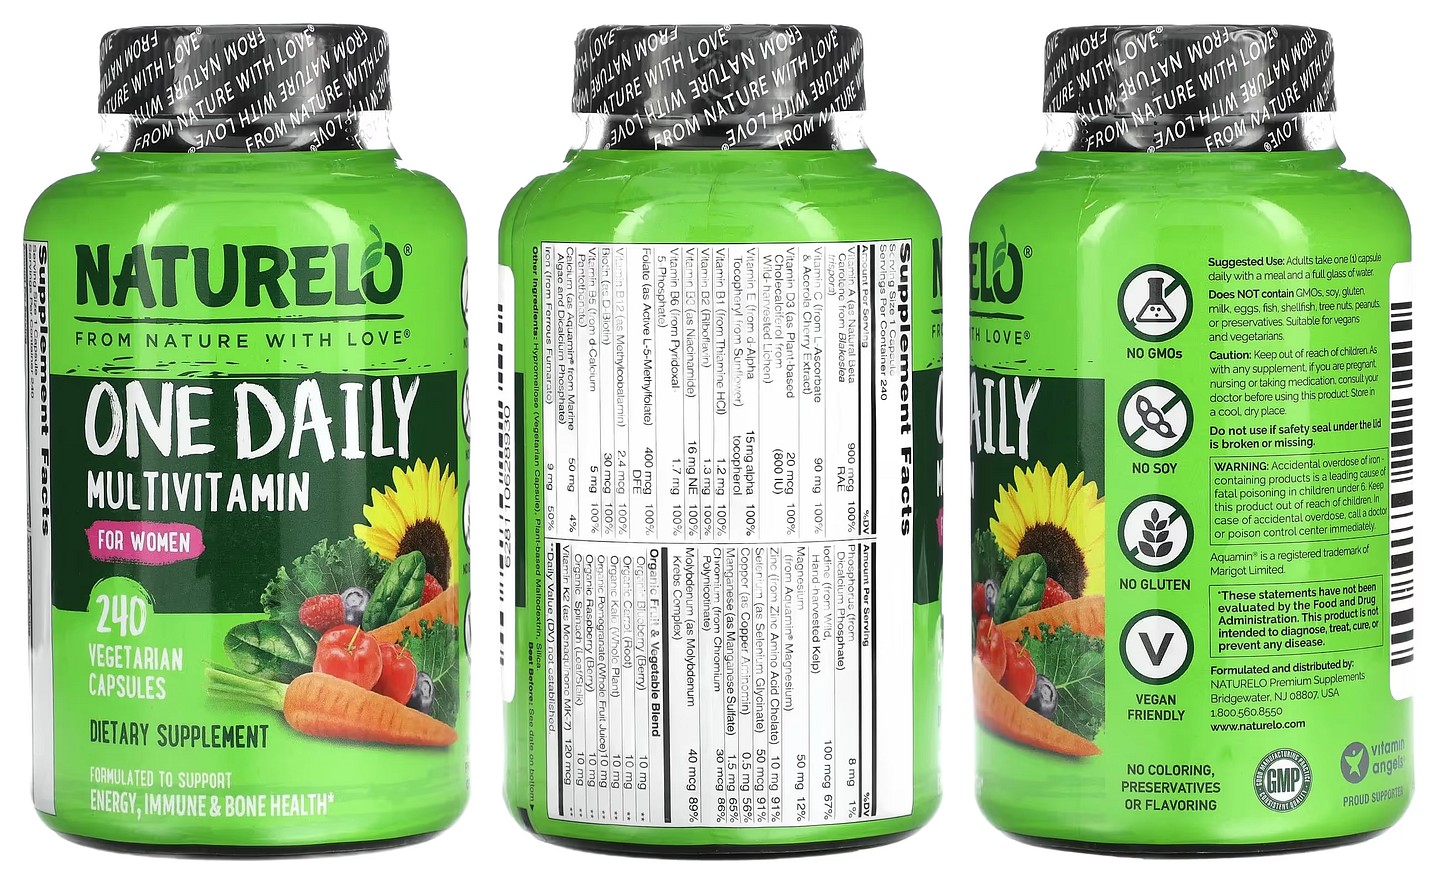 NATURELO, One Daily Multivitamin packaging